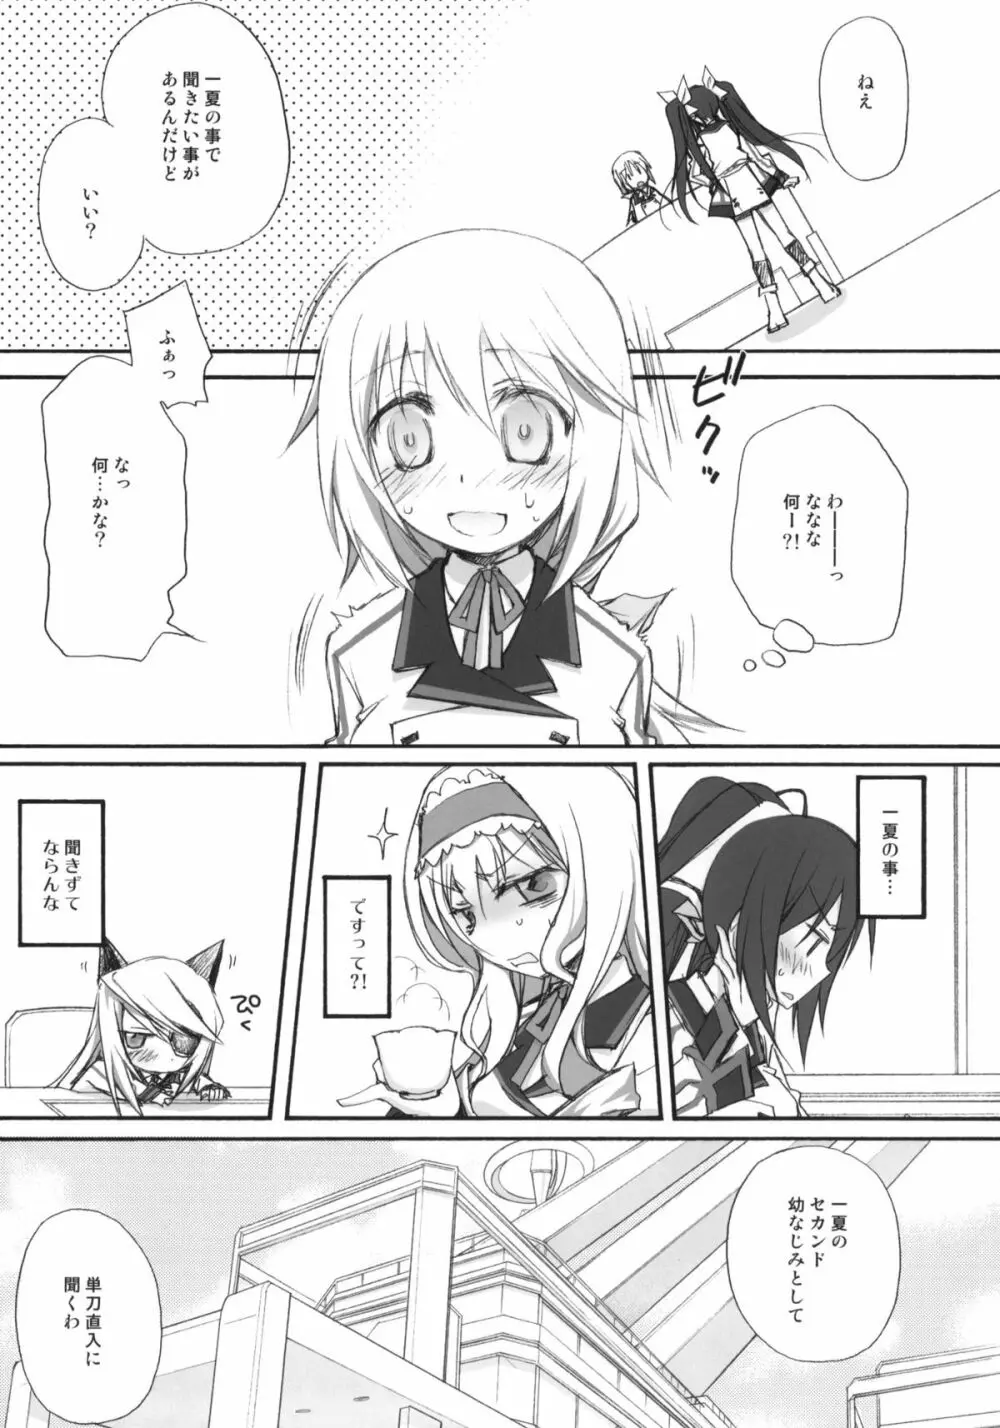 IS -いちゃいちゃ・すとらとす- - page4